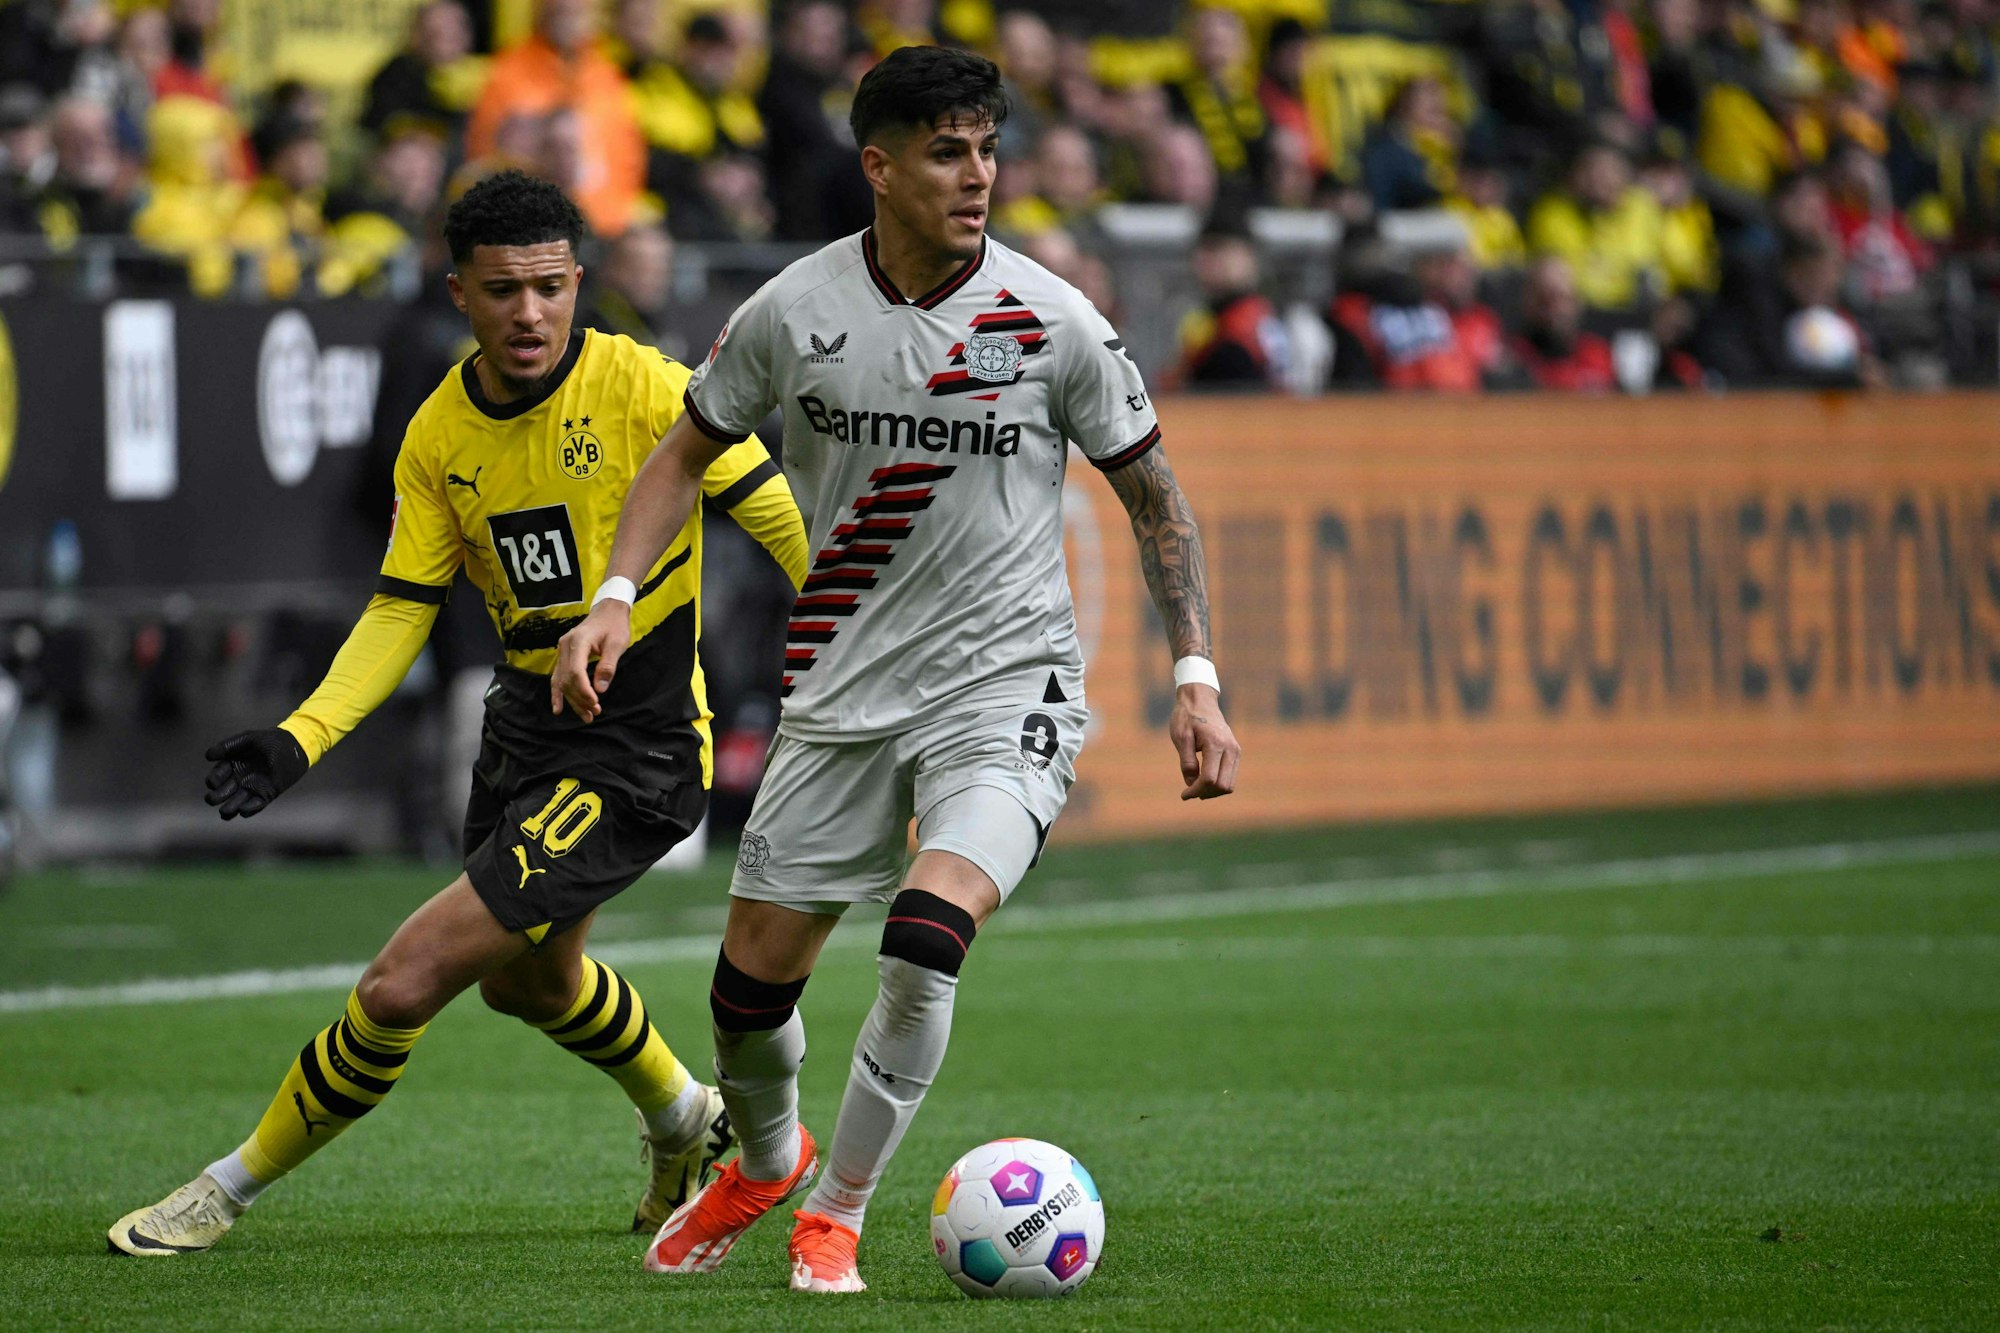 Dortmund's English midfielder #10 Jadon Sancho and Bayer Leverkusen's Ecuadorian defender #03 Piero Hincapie vie for the ball during the German first division Bundesliga football match between Borussia Dortmund and Bayer Leverkusen in Dortmund, western Germany, on April 21, 2024. (Photo by Sascha Schuermann / AFP) / DFL REGULATIONS PROHIBIT ANY USE OF PHOTOGRAPHS AS IMAGE SEQUENCES AND/OR QUASI-VIDEO